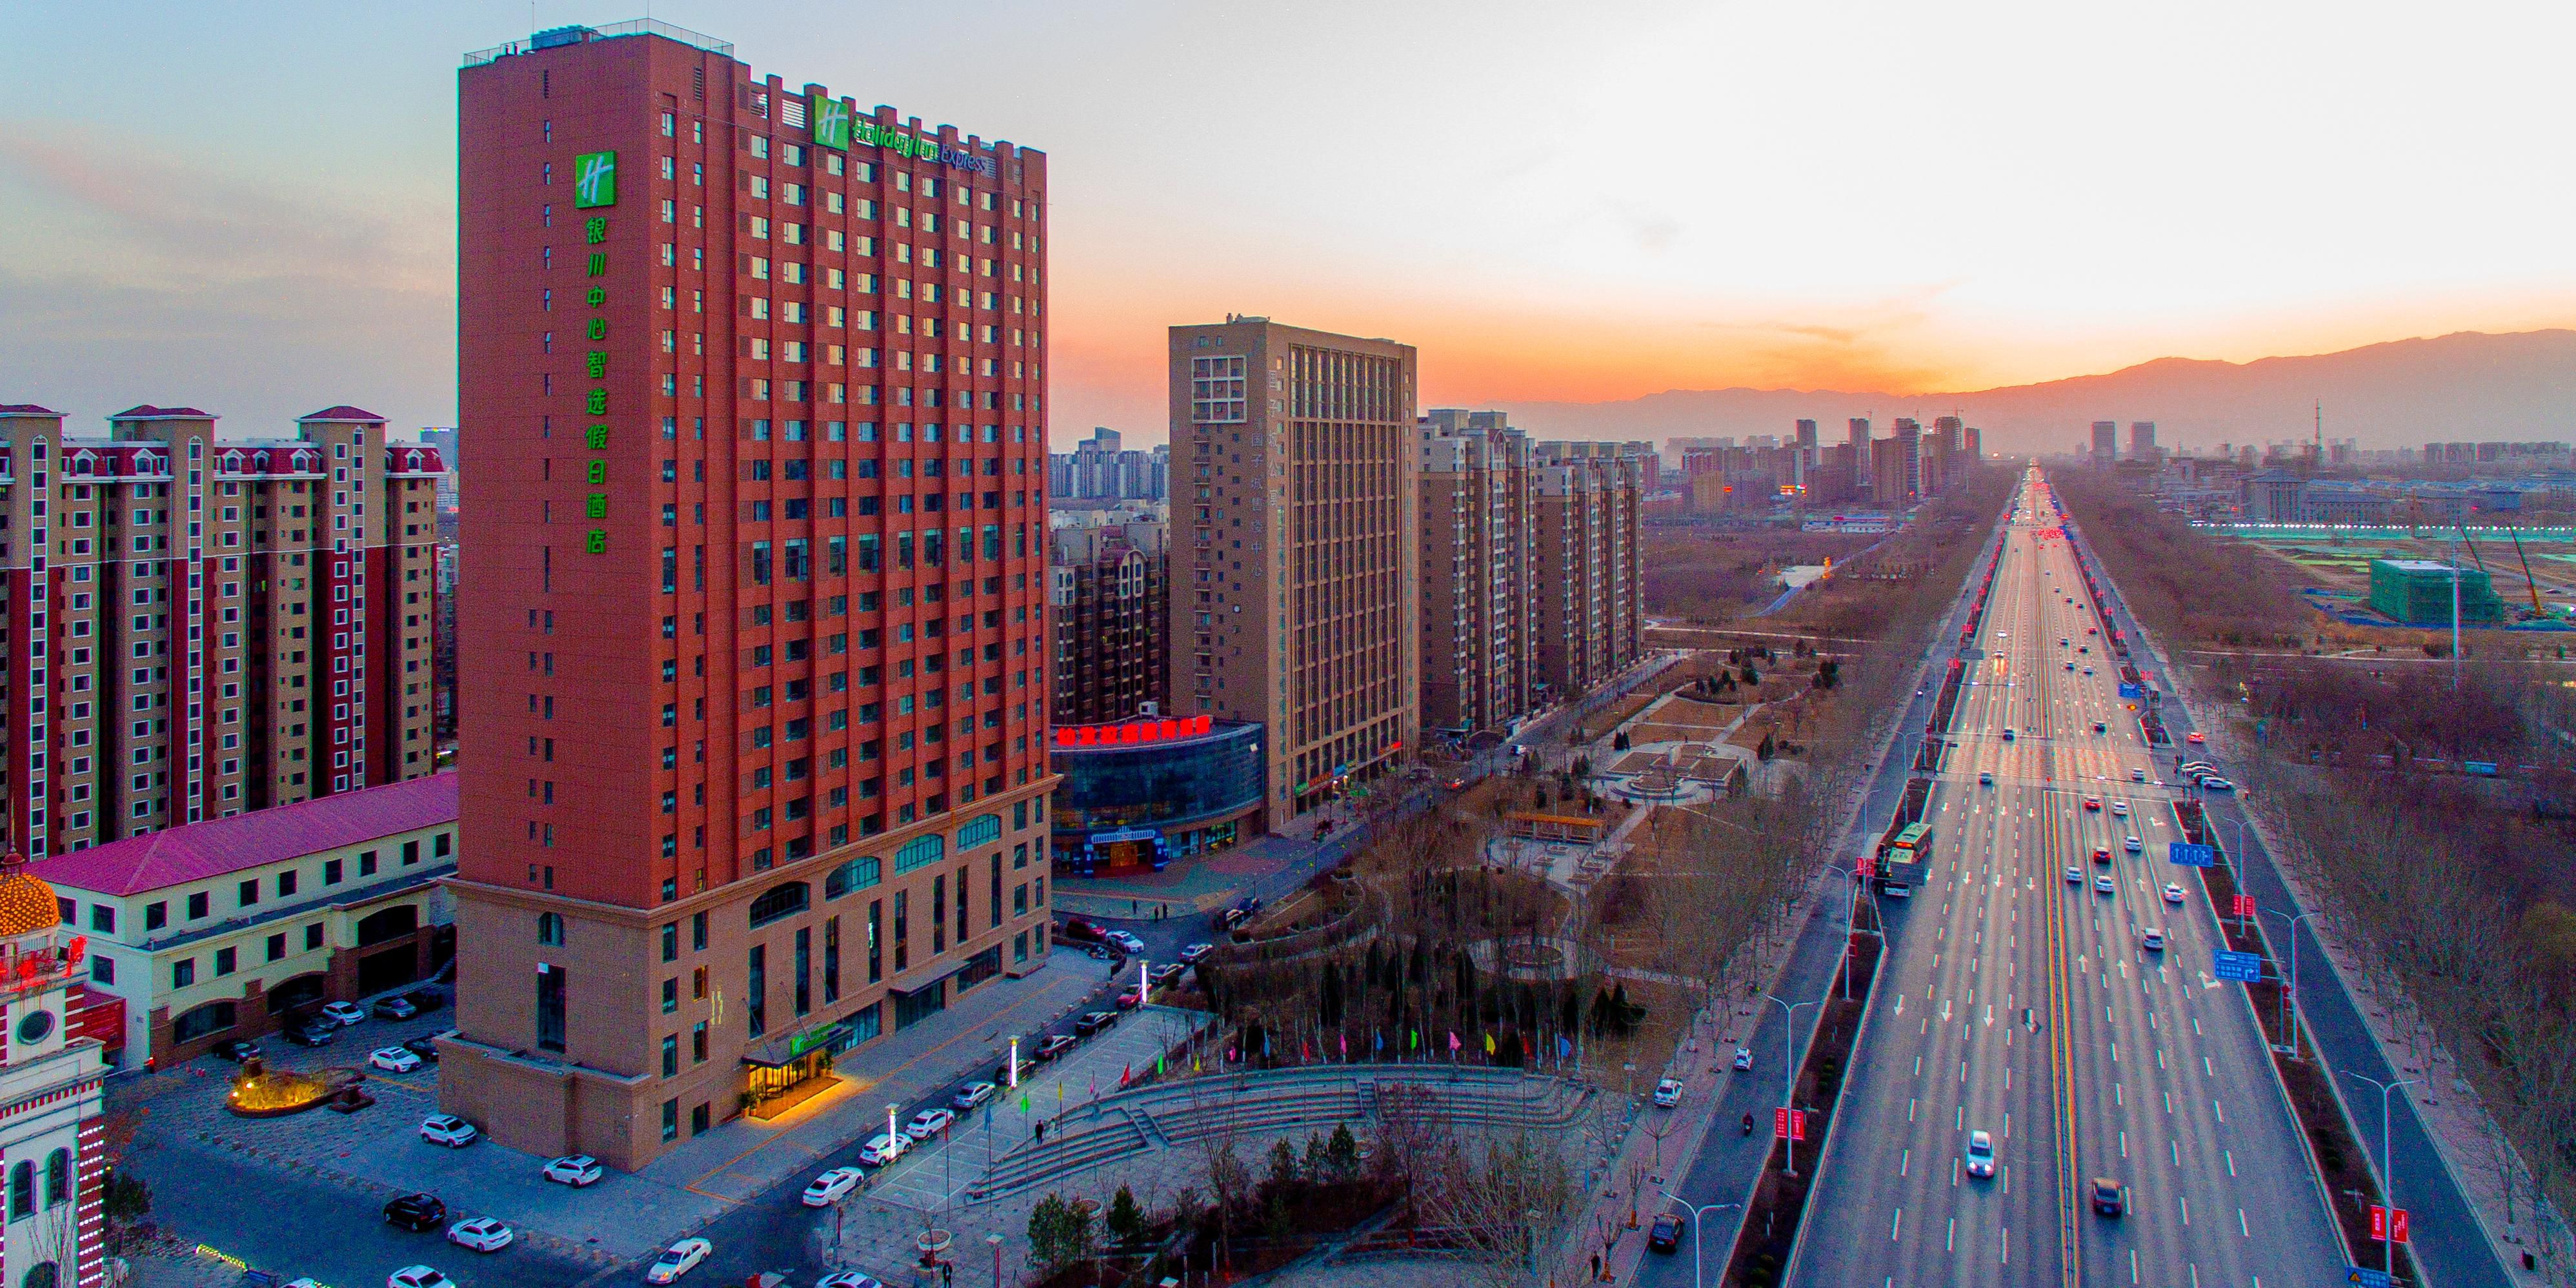 Across from the hotel is Yinchuan No. 9 High School, which has been the place for high school entrance examination, college entrance examination, graduate examination, and professional title examination. Provides convenient accommodation environment for examinees.